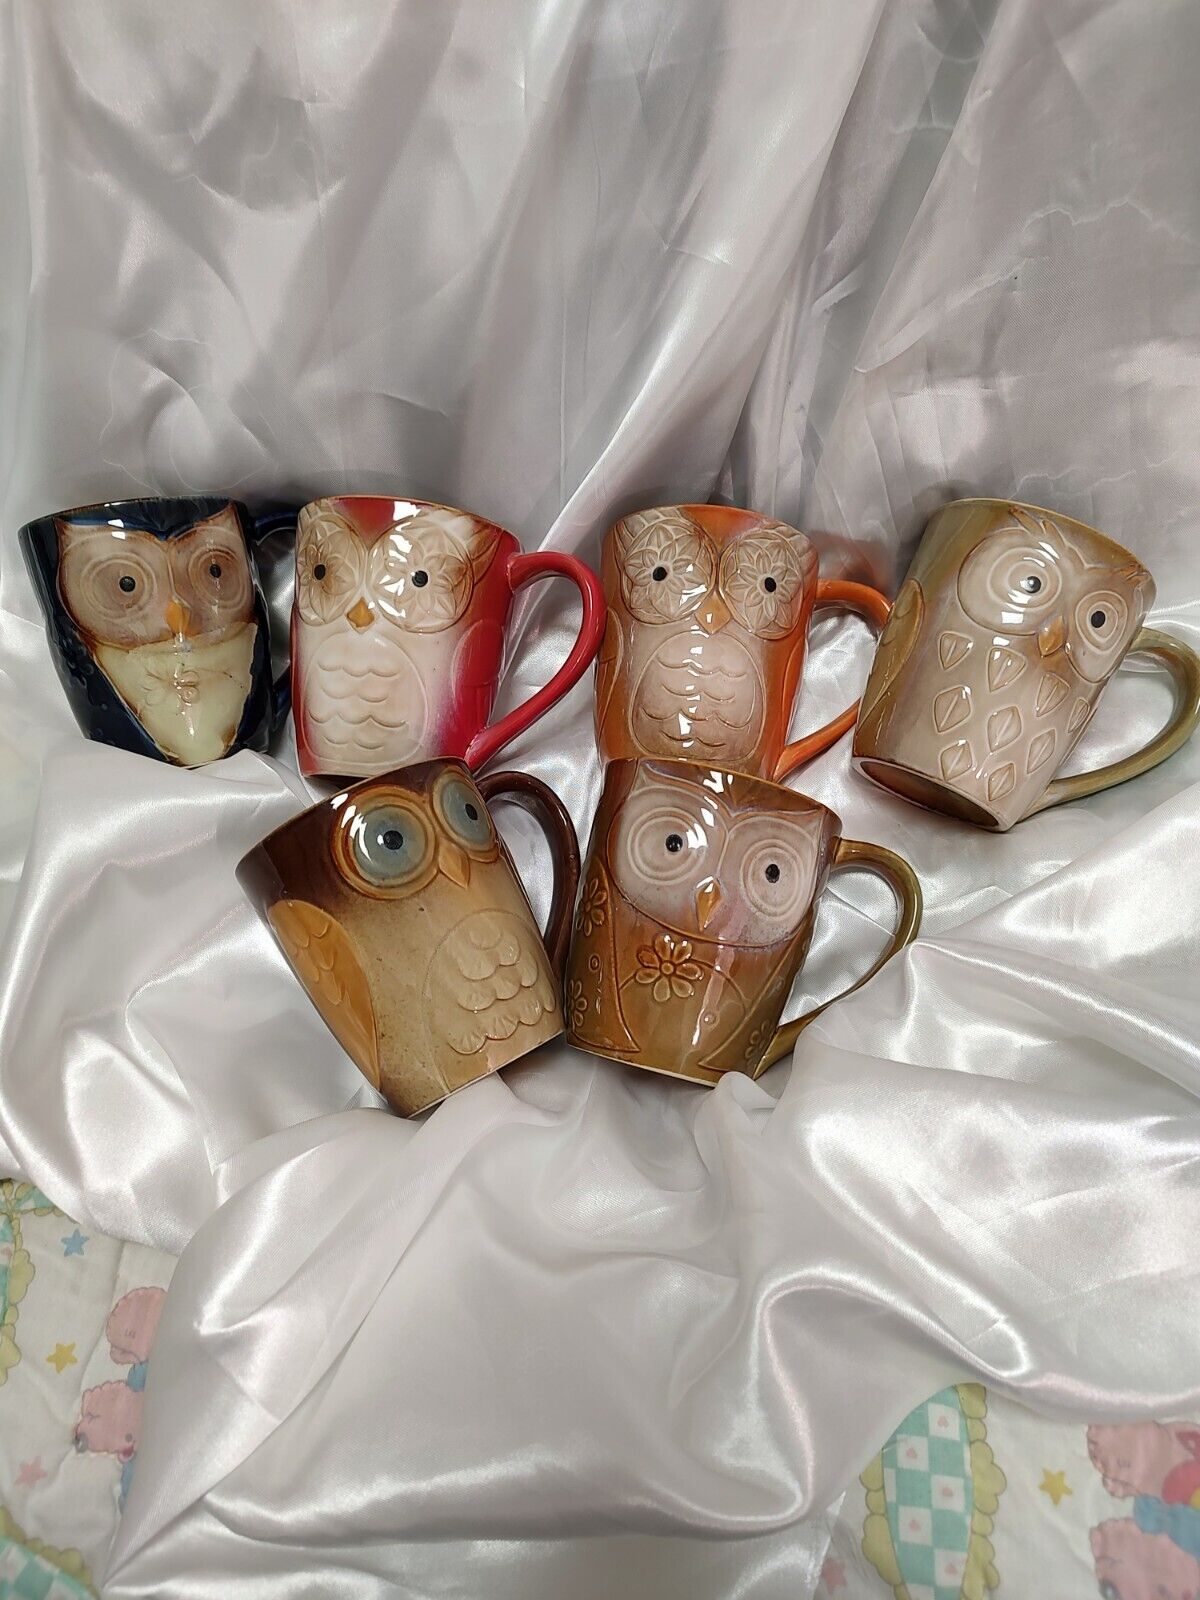 Owl mug coffee cup bird art hand painted set of 6 excellent condition